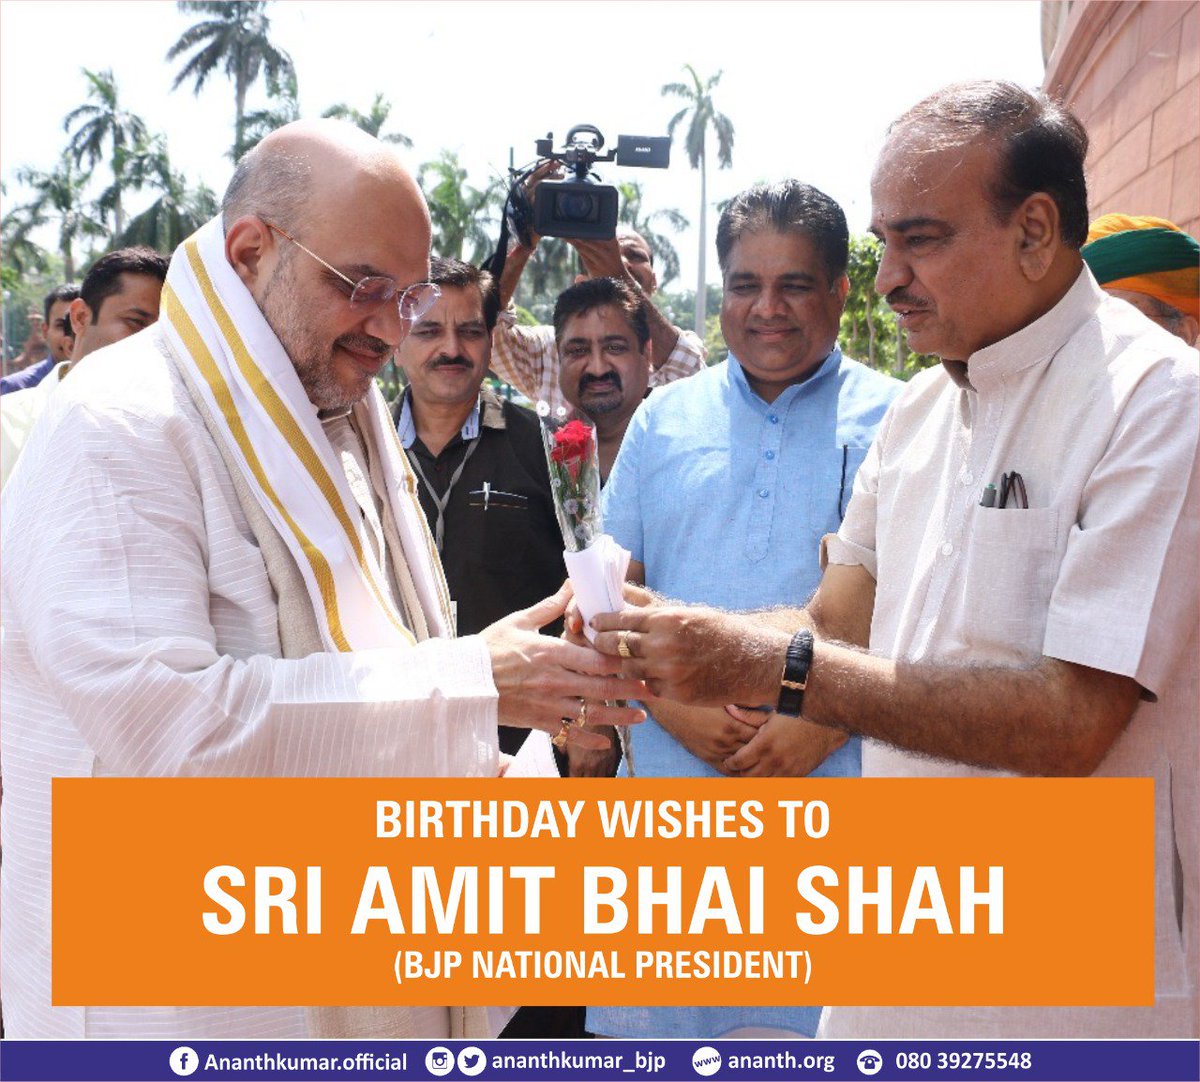 Heartfelt birthday wishes to Sh @amitshah ji. May he be blessed with a long & healthy life in the service of our nation. #HappyBirthydayAmitShah .